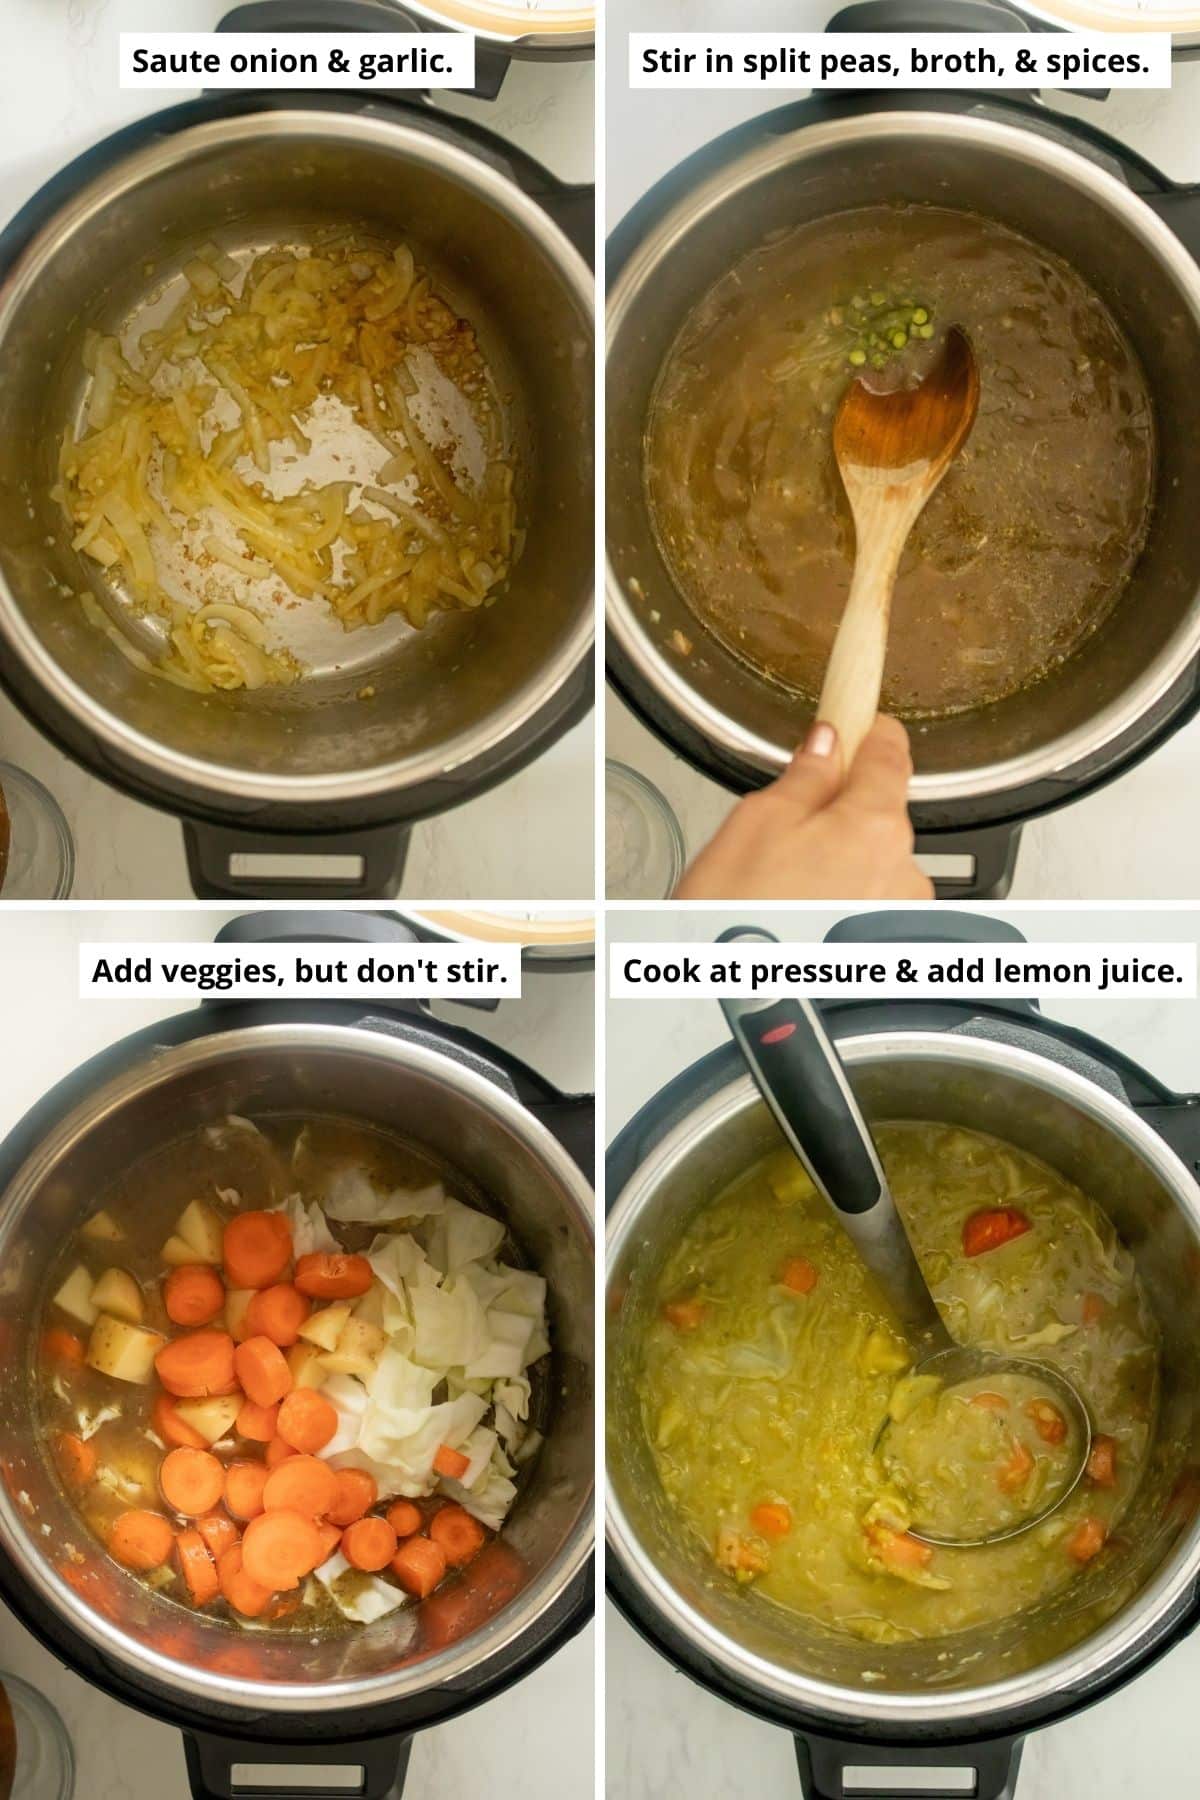 image collage showing the cooked garlic and onion in the Instant Pot, adding the split peas, broth, and spices, adding the veggies, and the finished soup in the pot after stirring in lemon juice